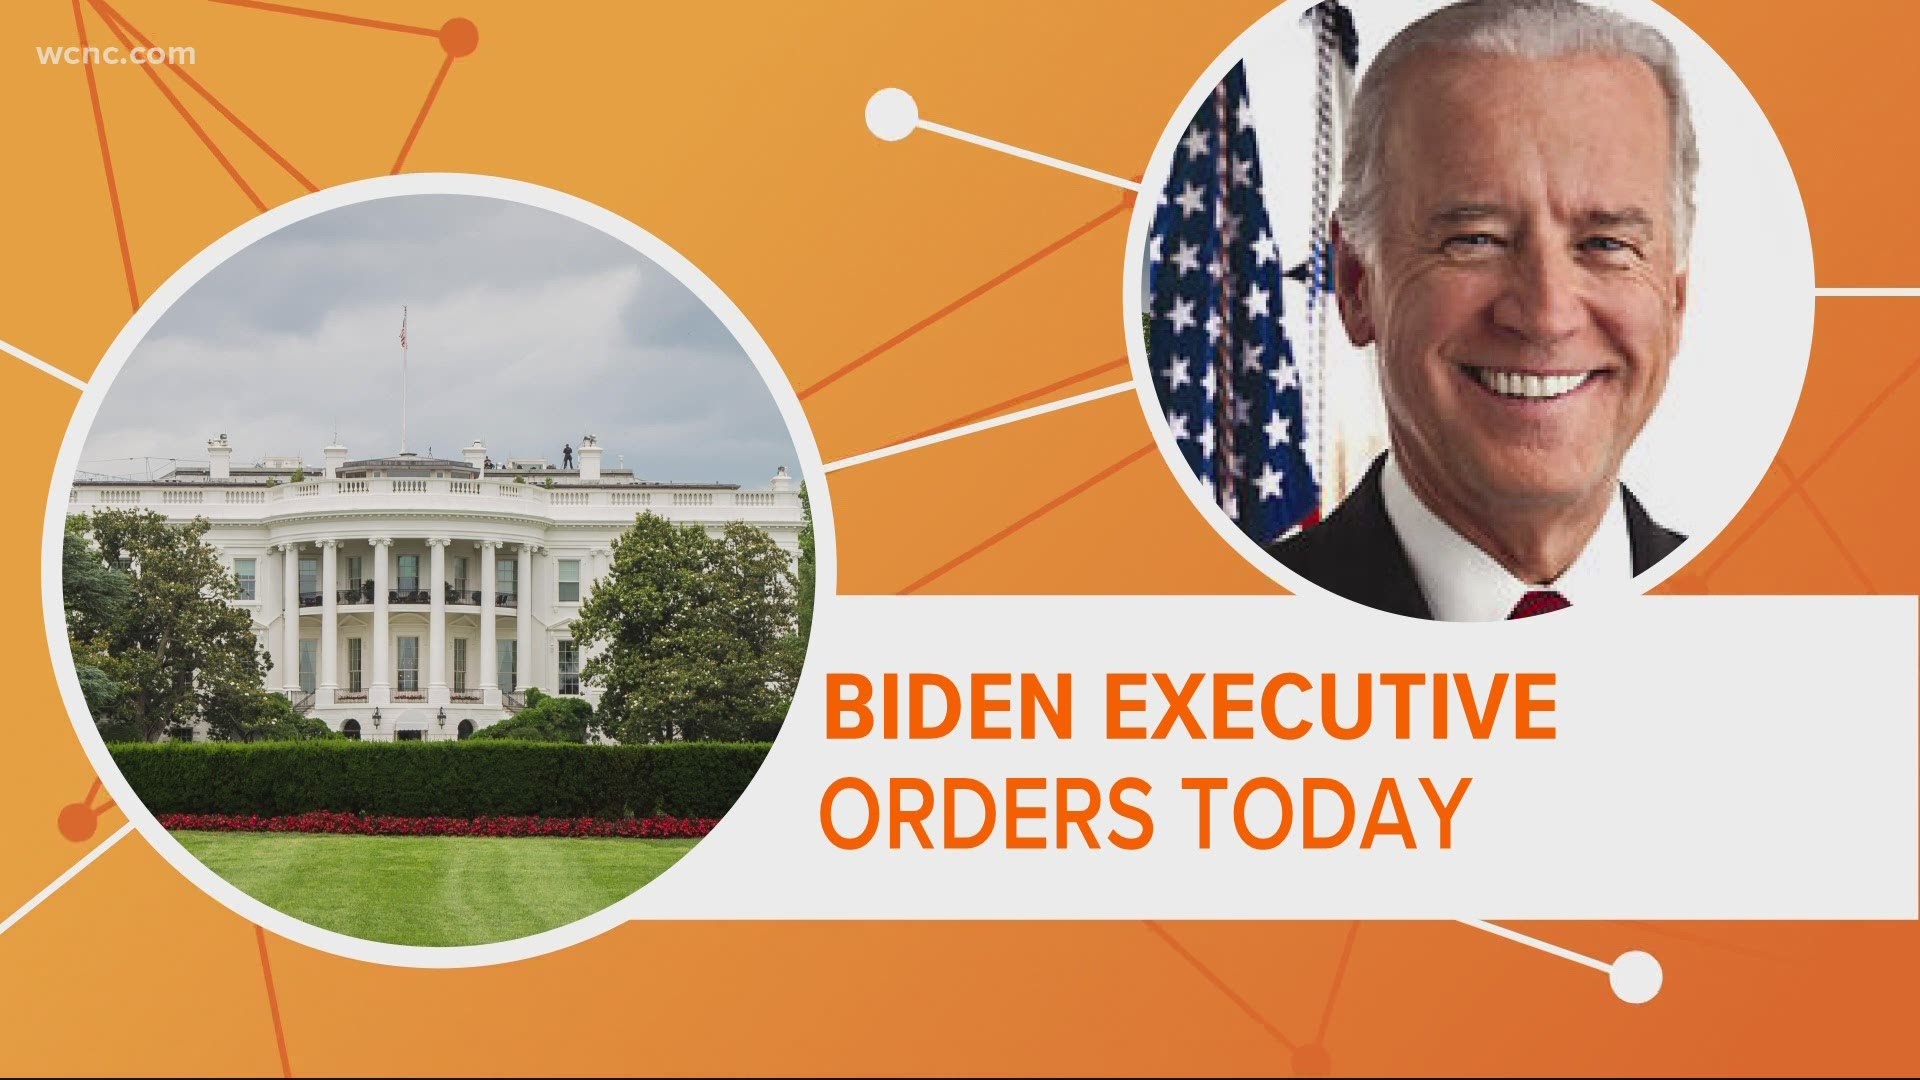 President-elect Joe Biden isn't wasting any time getting to work, as he's scheduled to have an extremely busy first day at the White House.